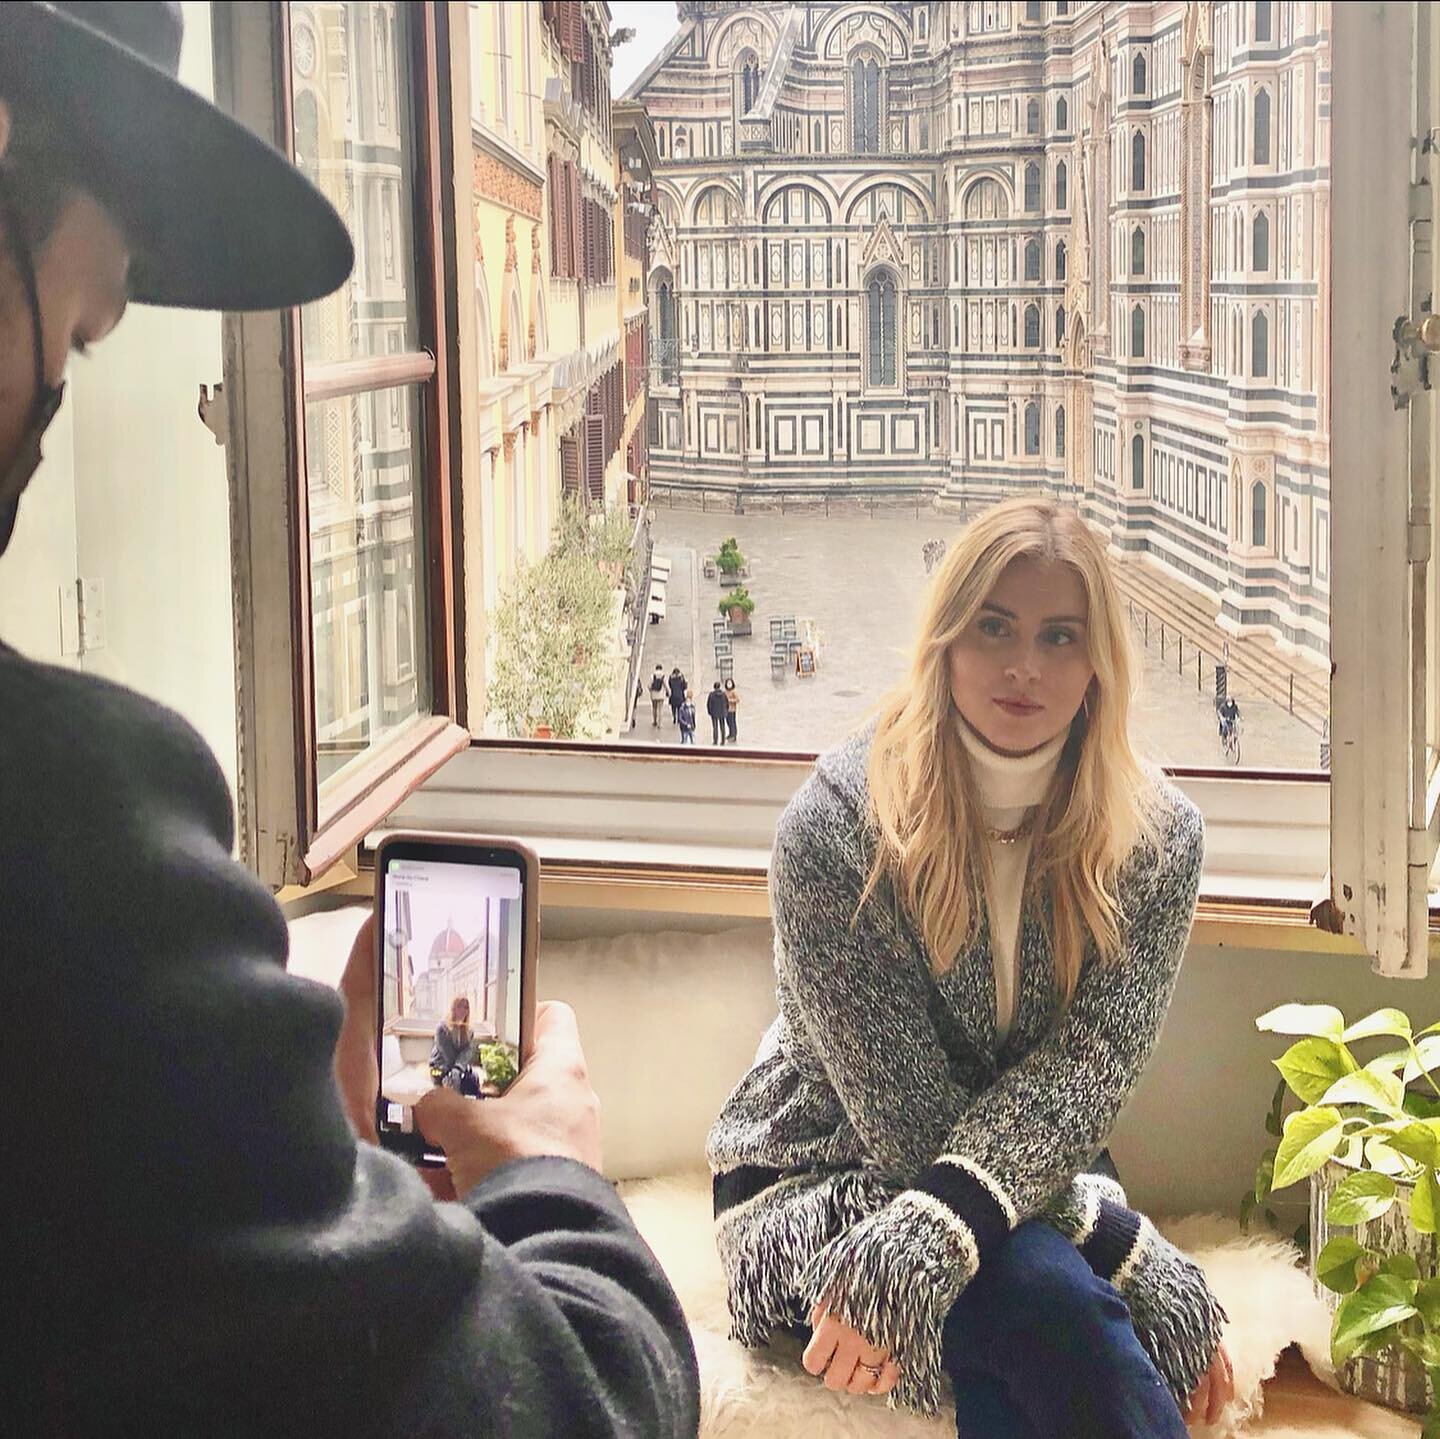 @valentinaferragni and @lucavezil came to the studio and the new @anteluxfirenze balcony. We took some fun videos and photos with our photographer friend @gabdetails. We talked about life, covid, work, travel - they were so genuine and down to earth,